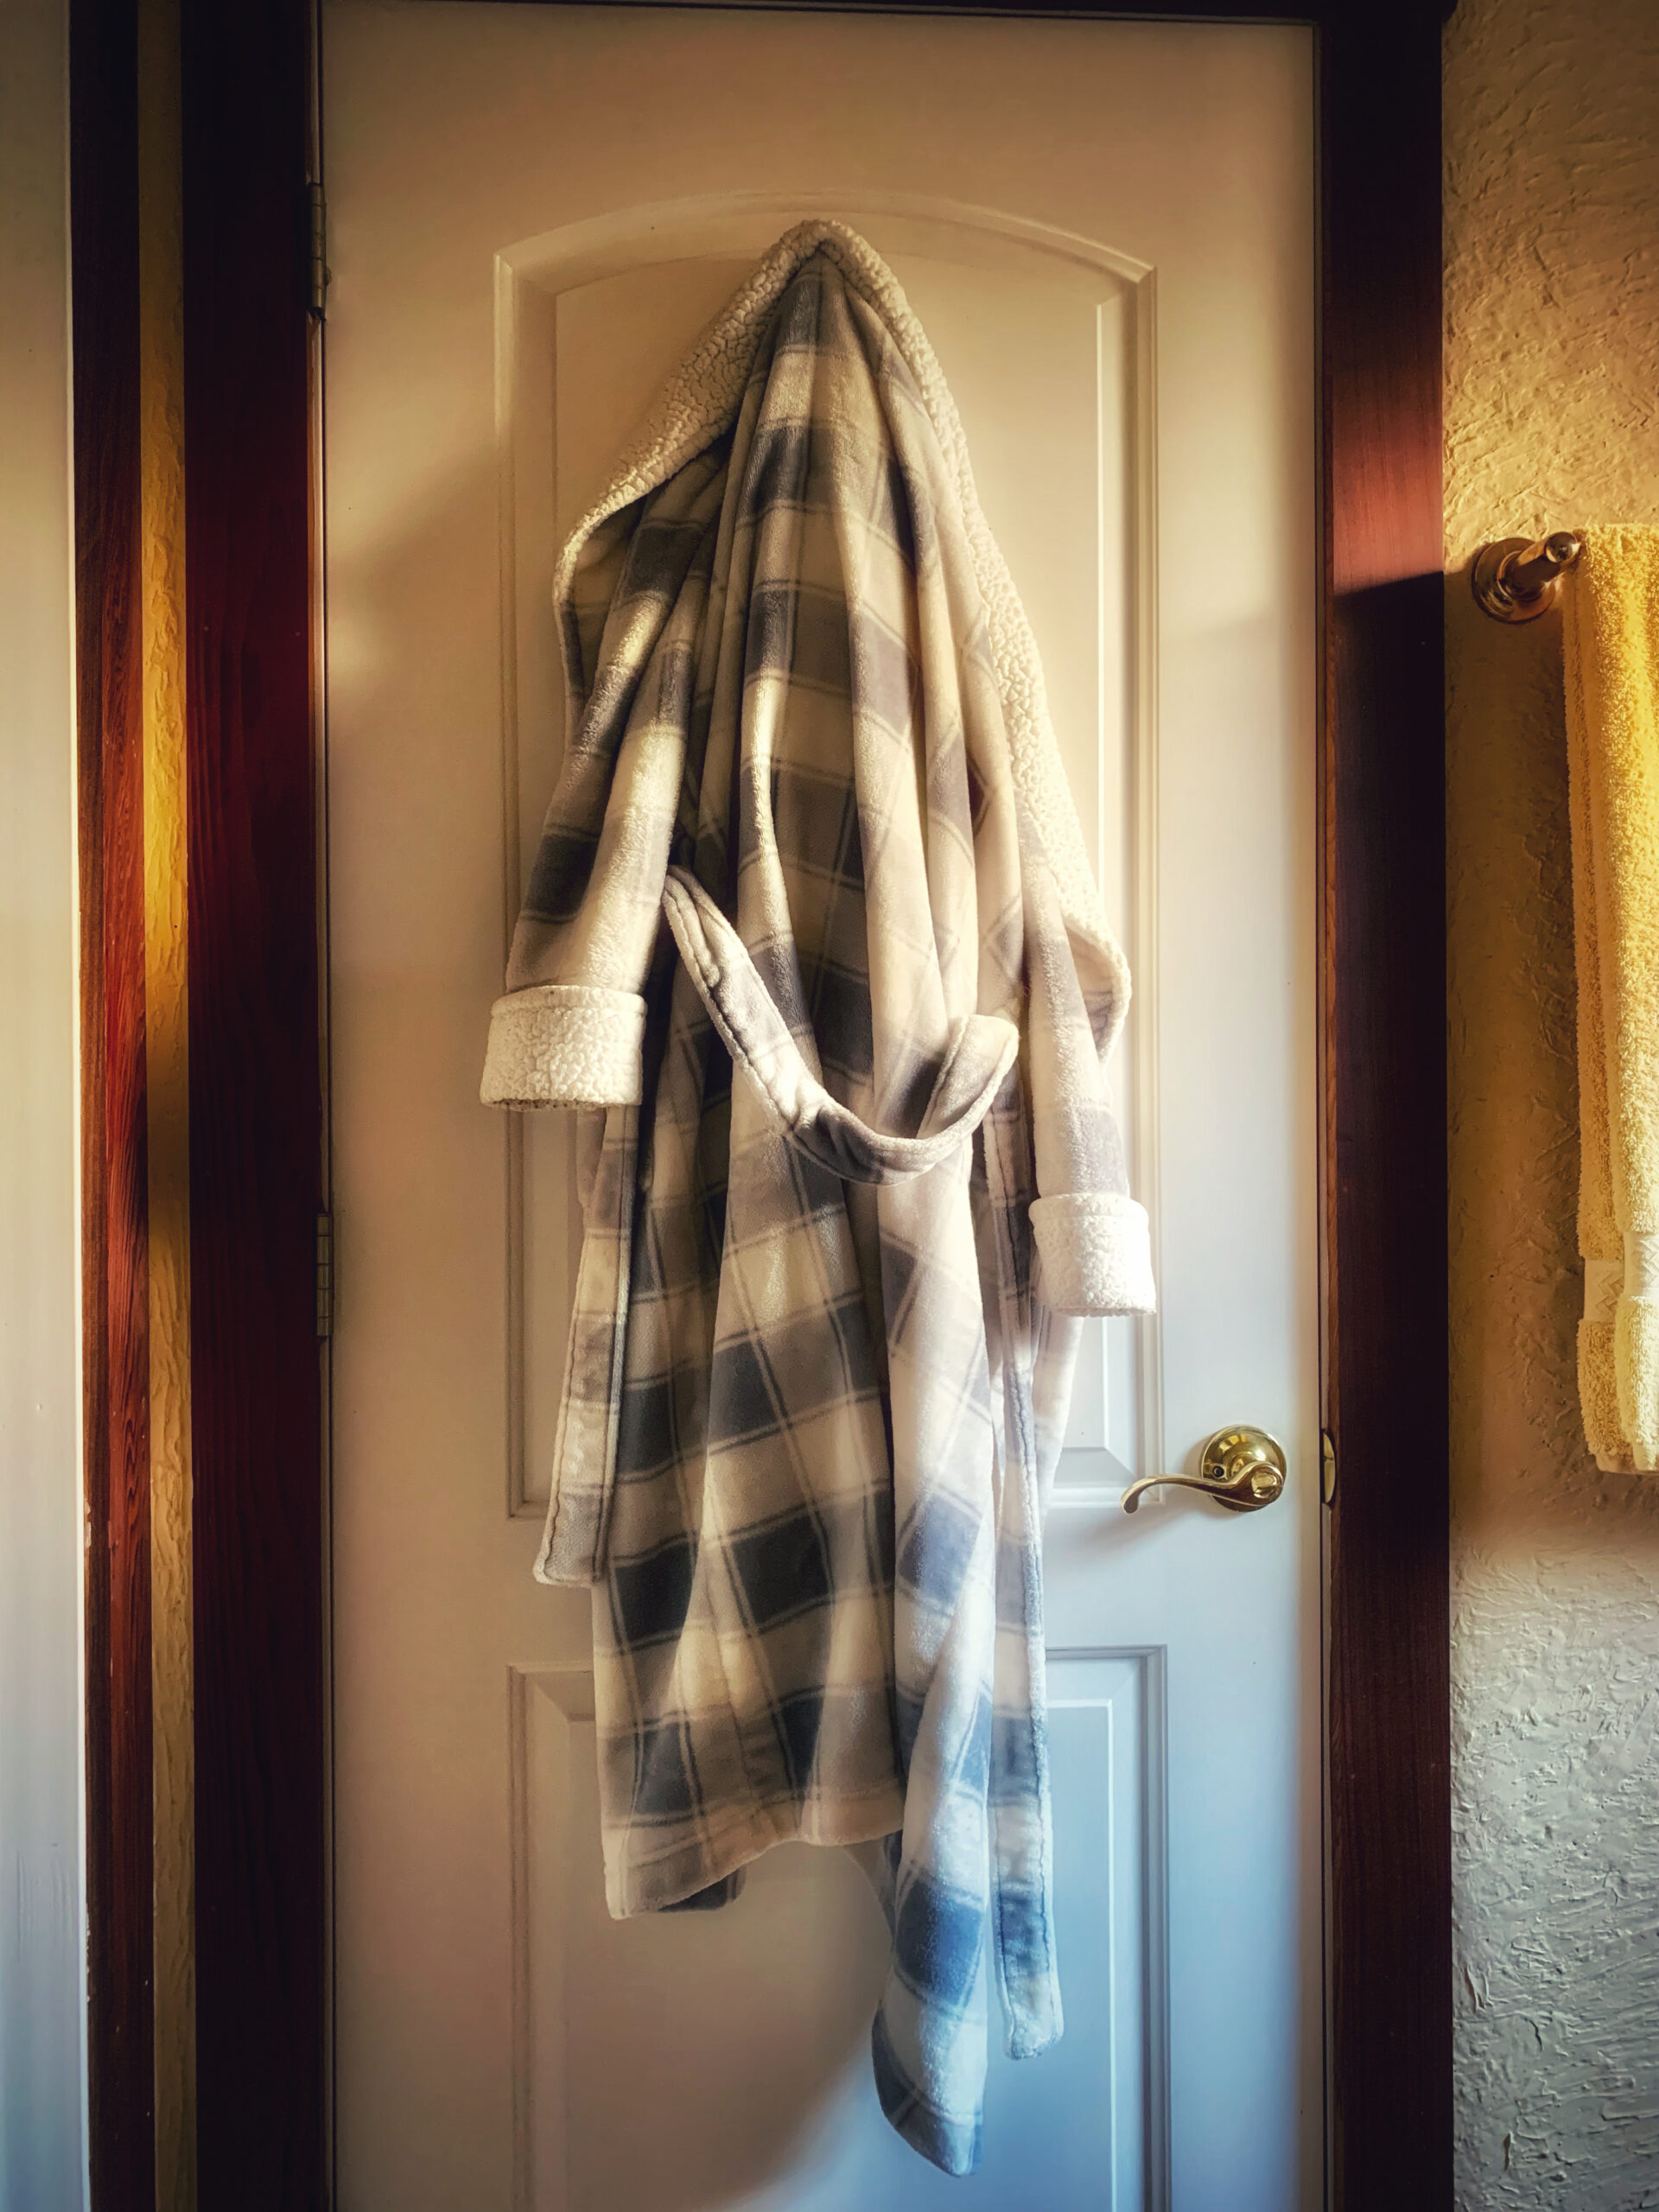 A robe hanging on the door of a bathroom.